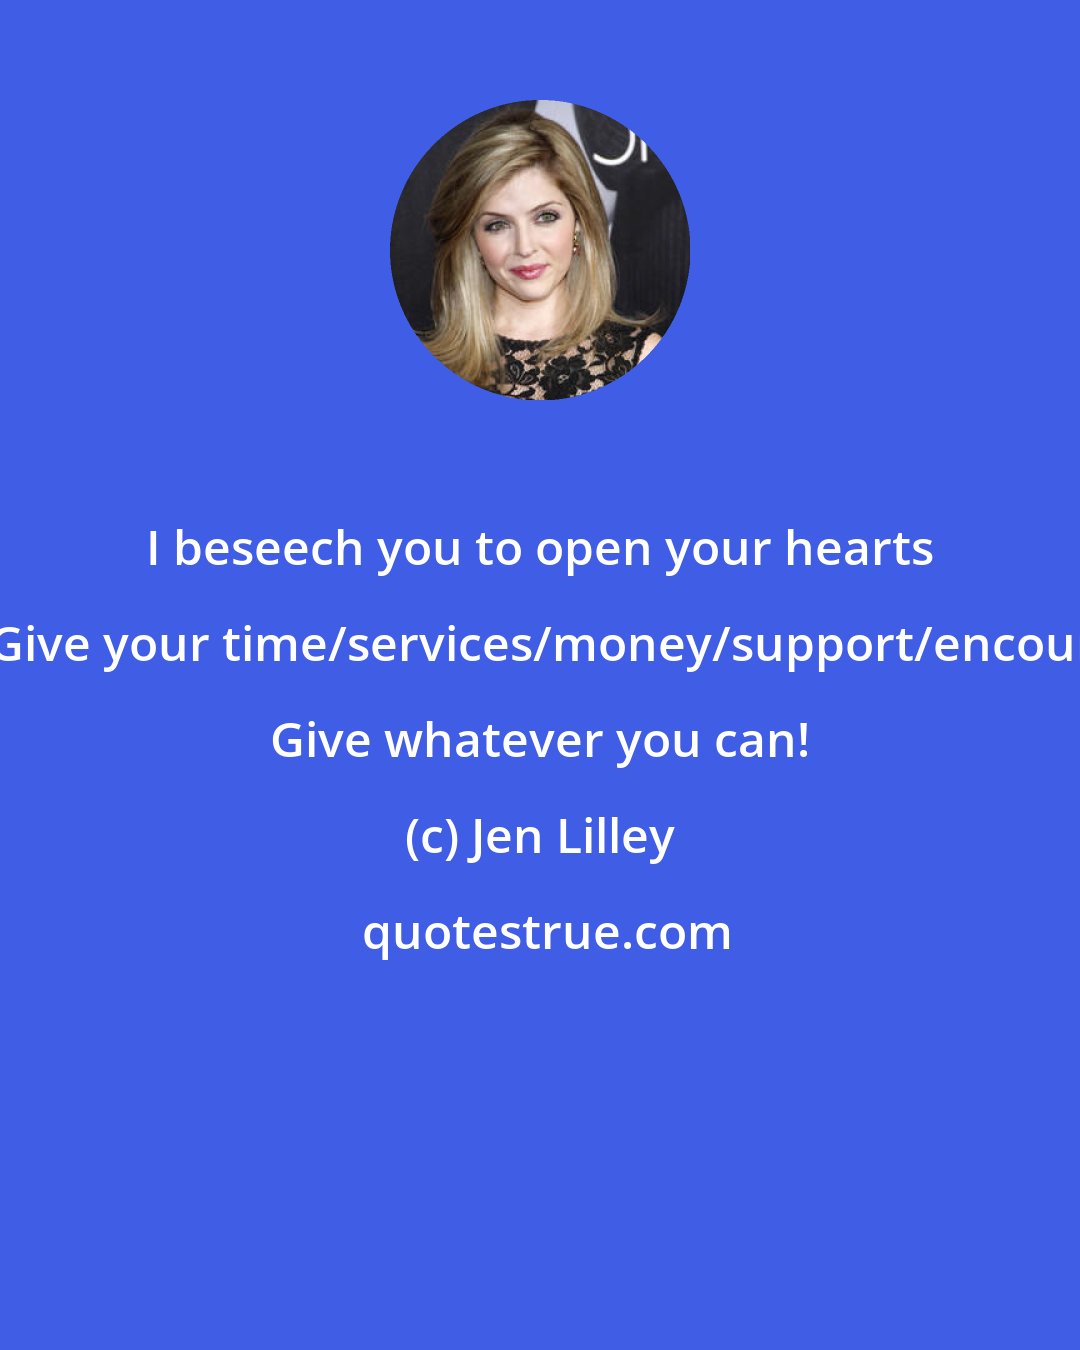 Jen Lilley: I beseech you to open your hearts and give back! Give your time/services/money/support/encouragement/love! Give whatever you can!